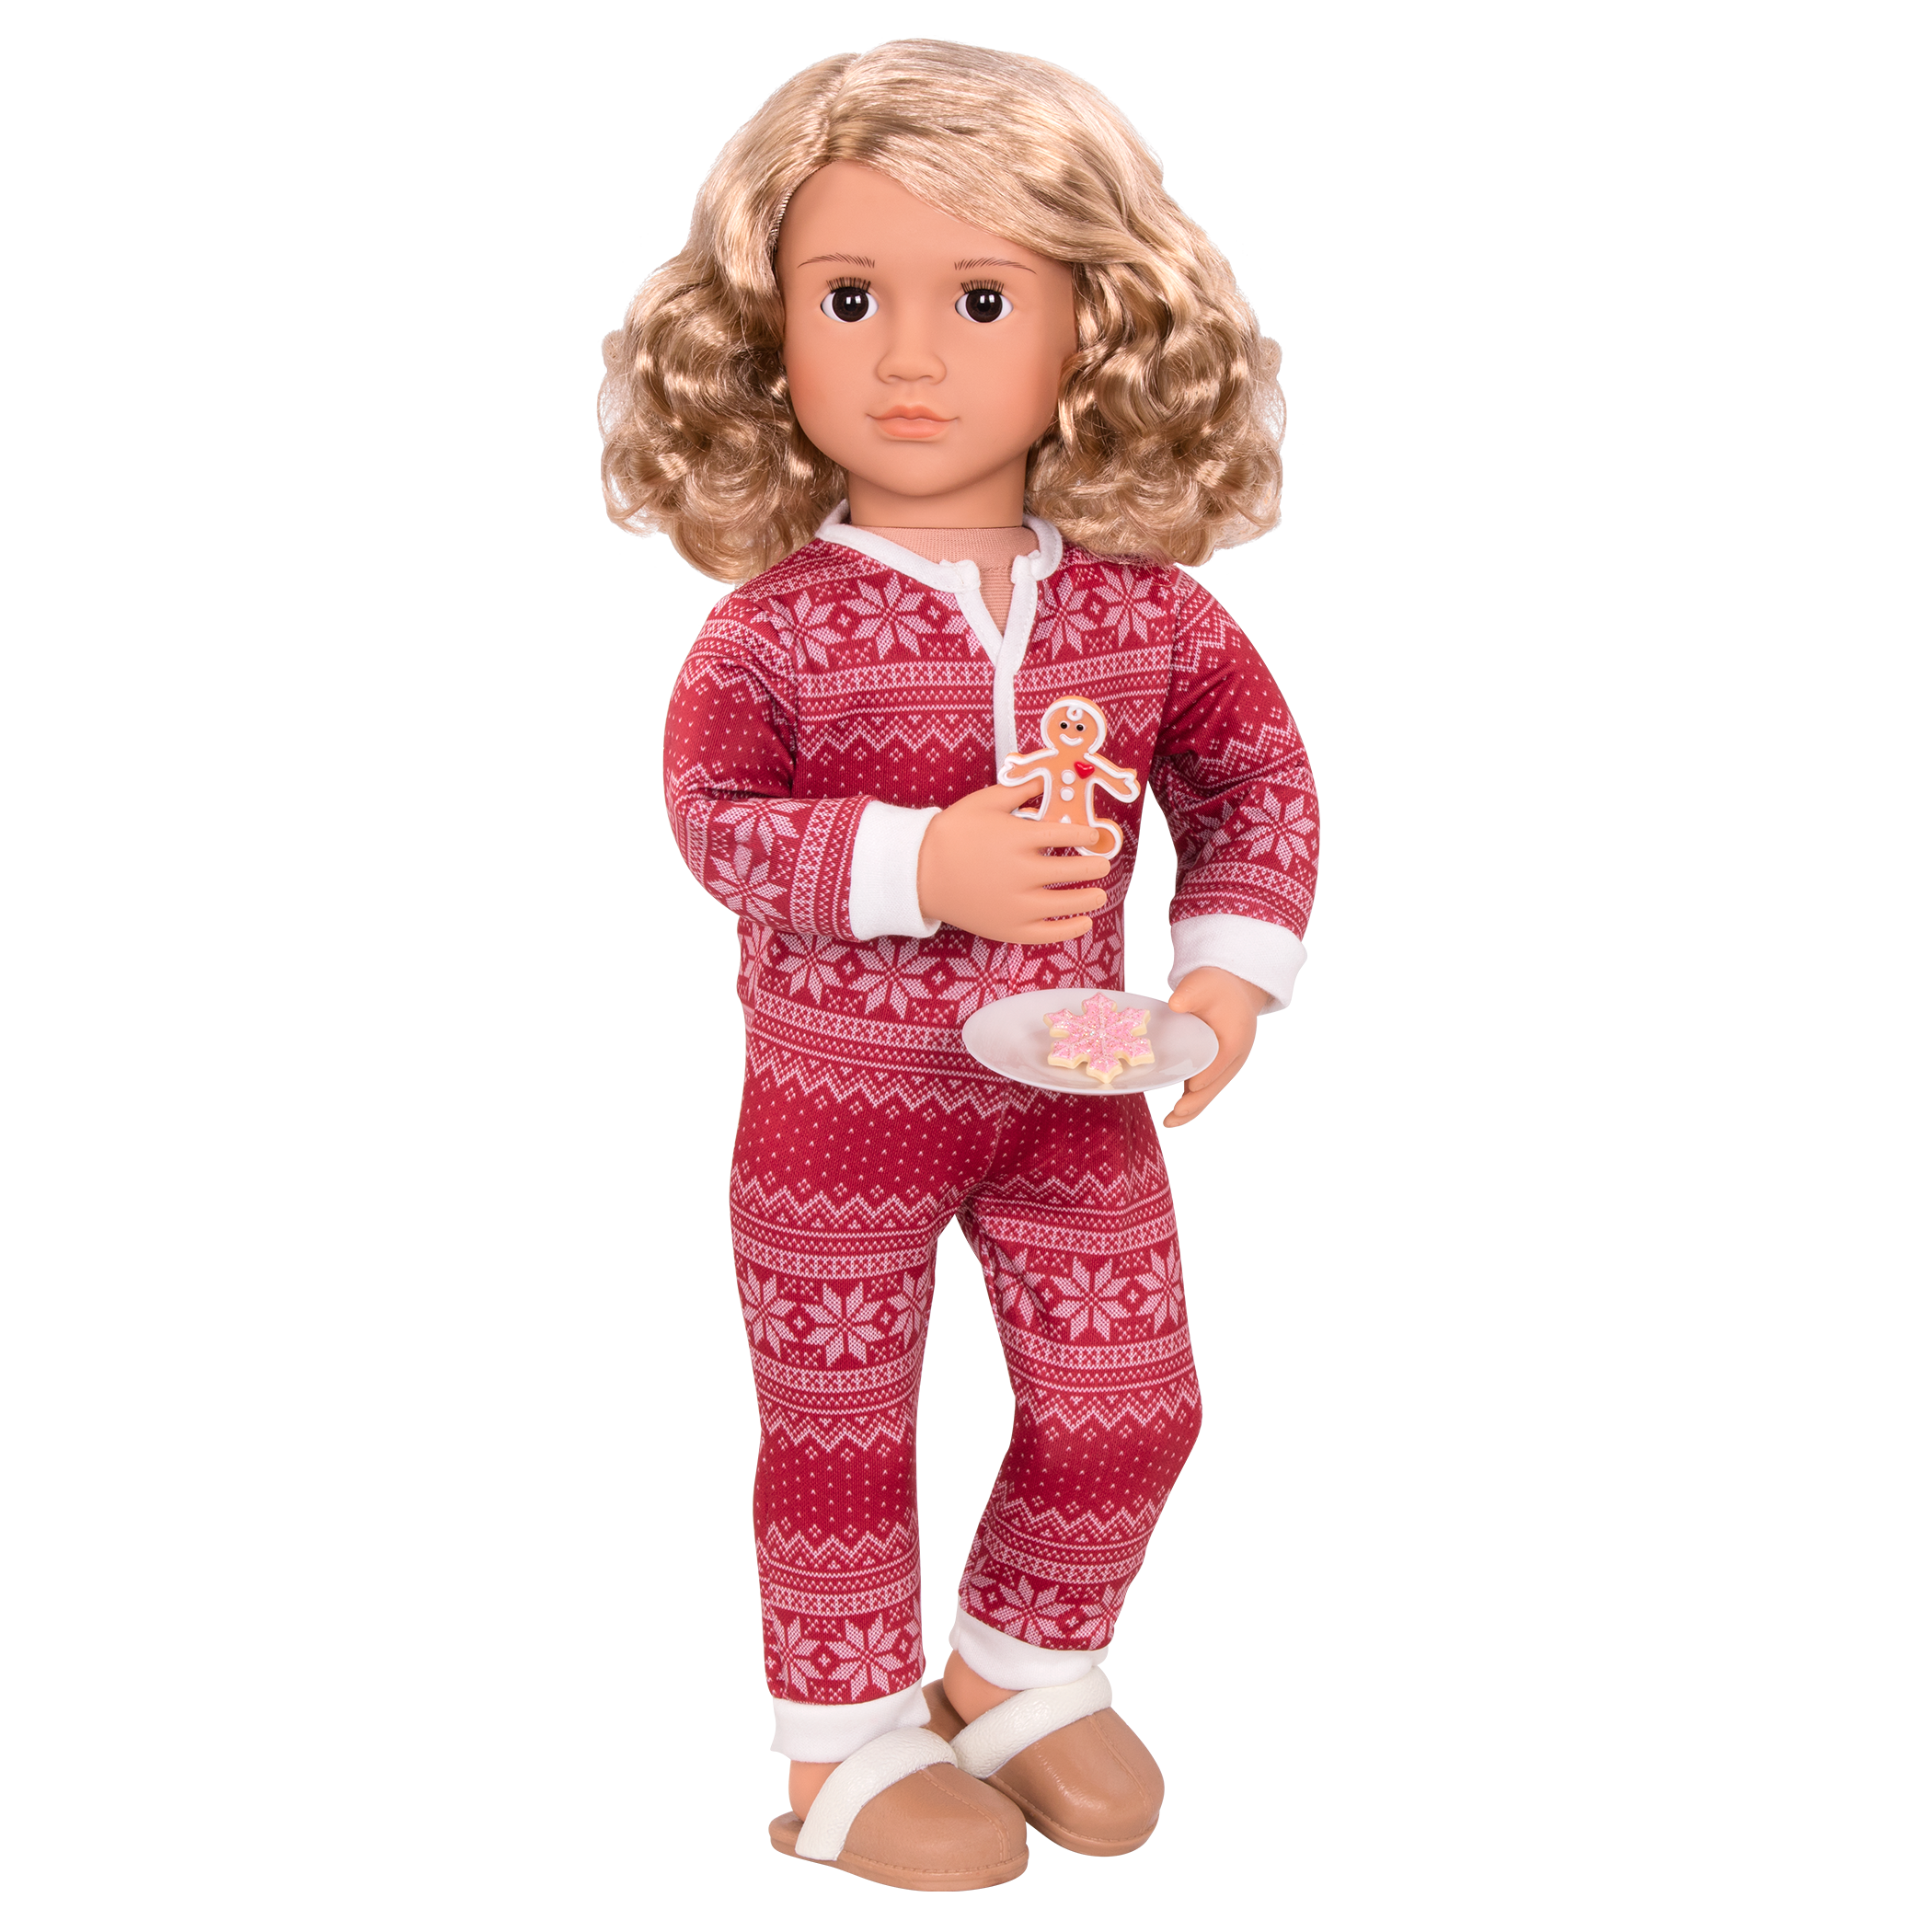 18-inch holiday doll with blonde hair, brown eyes, Christmas accessories and storybook